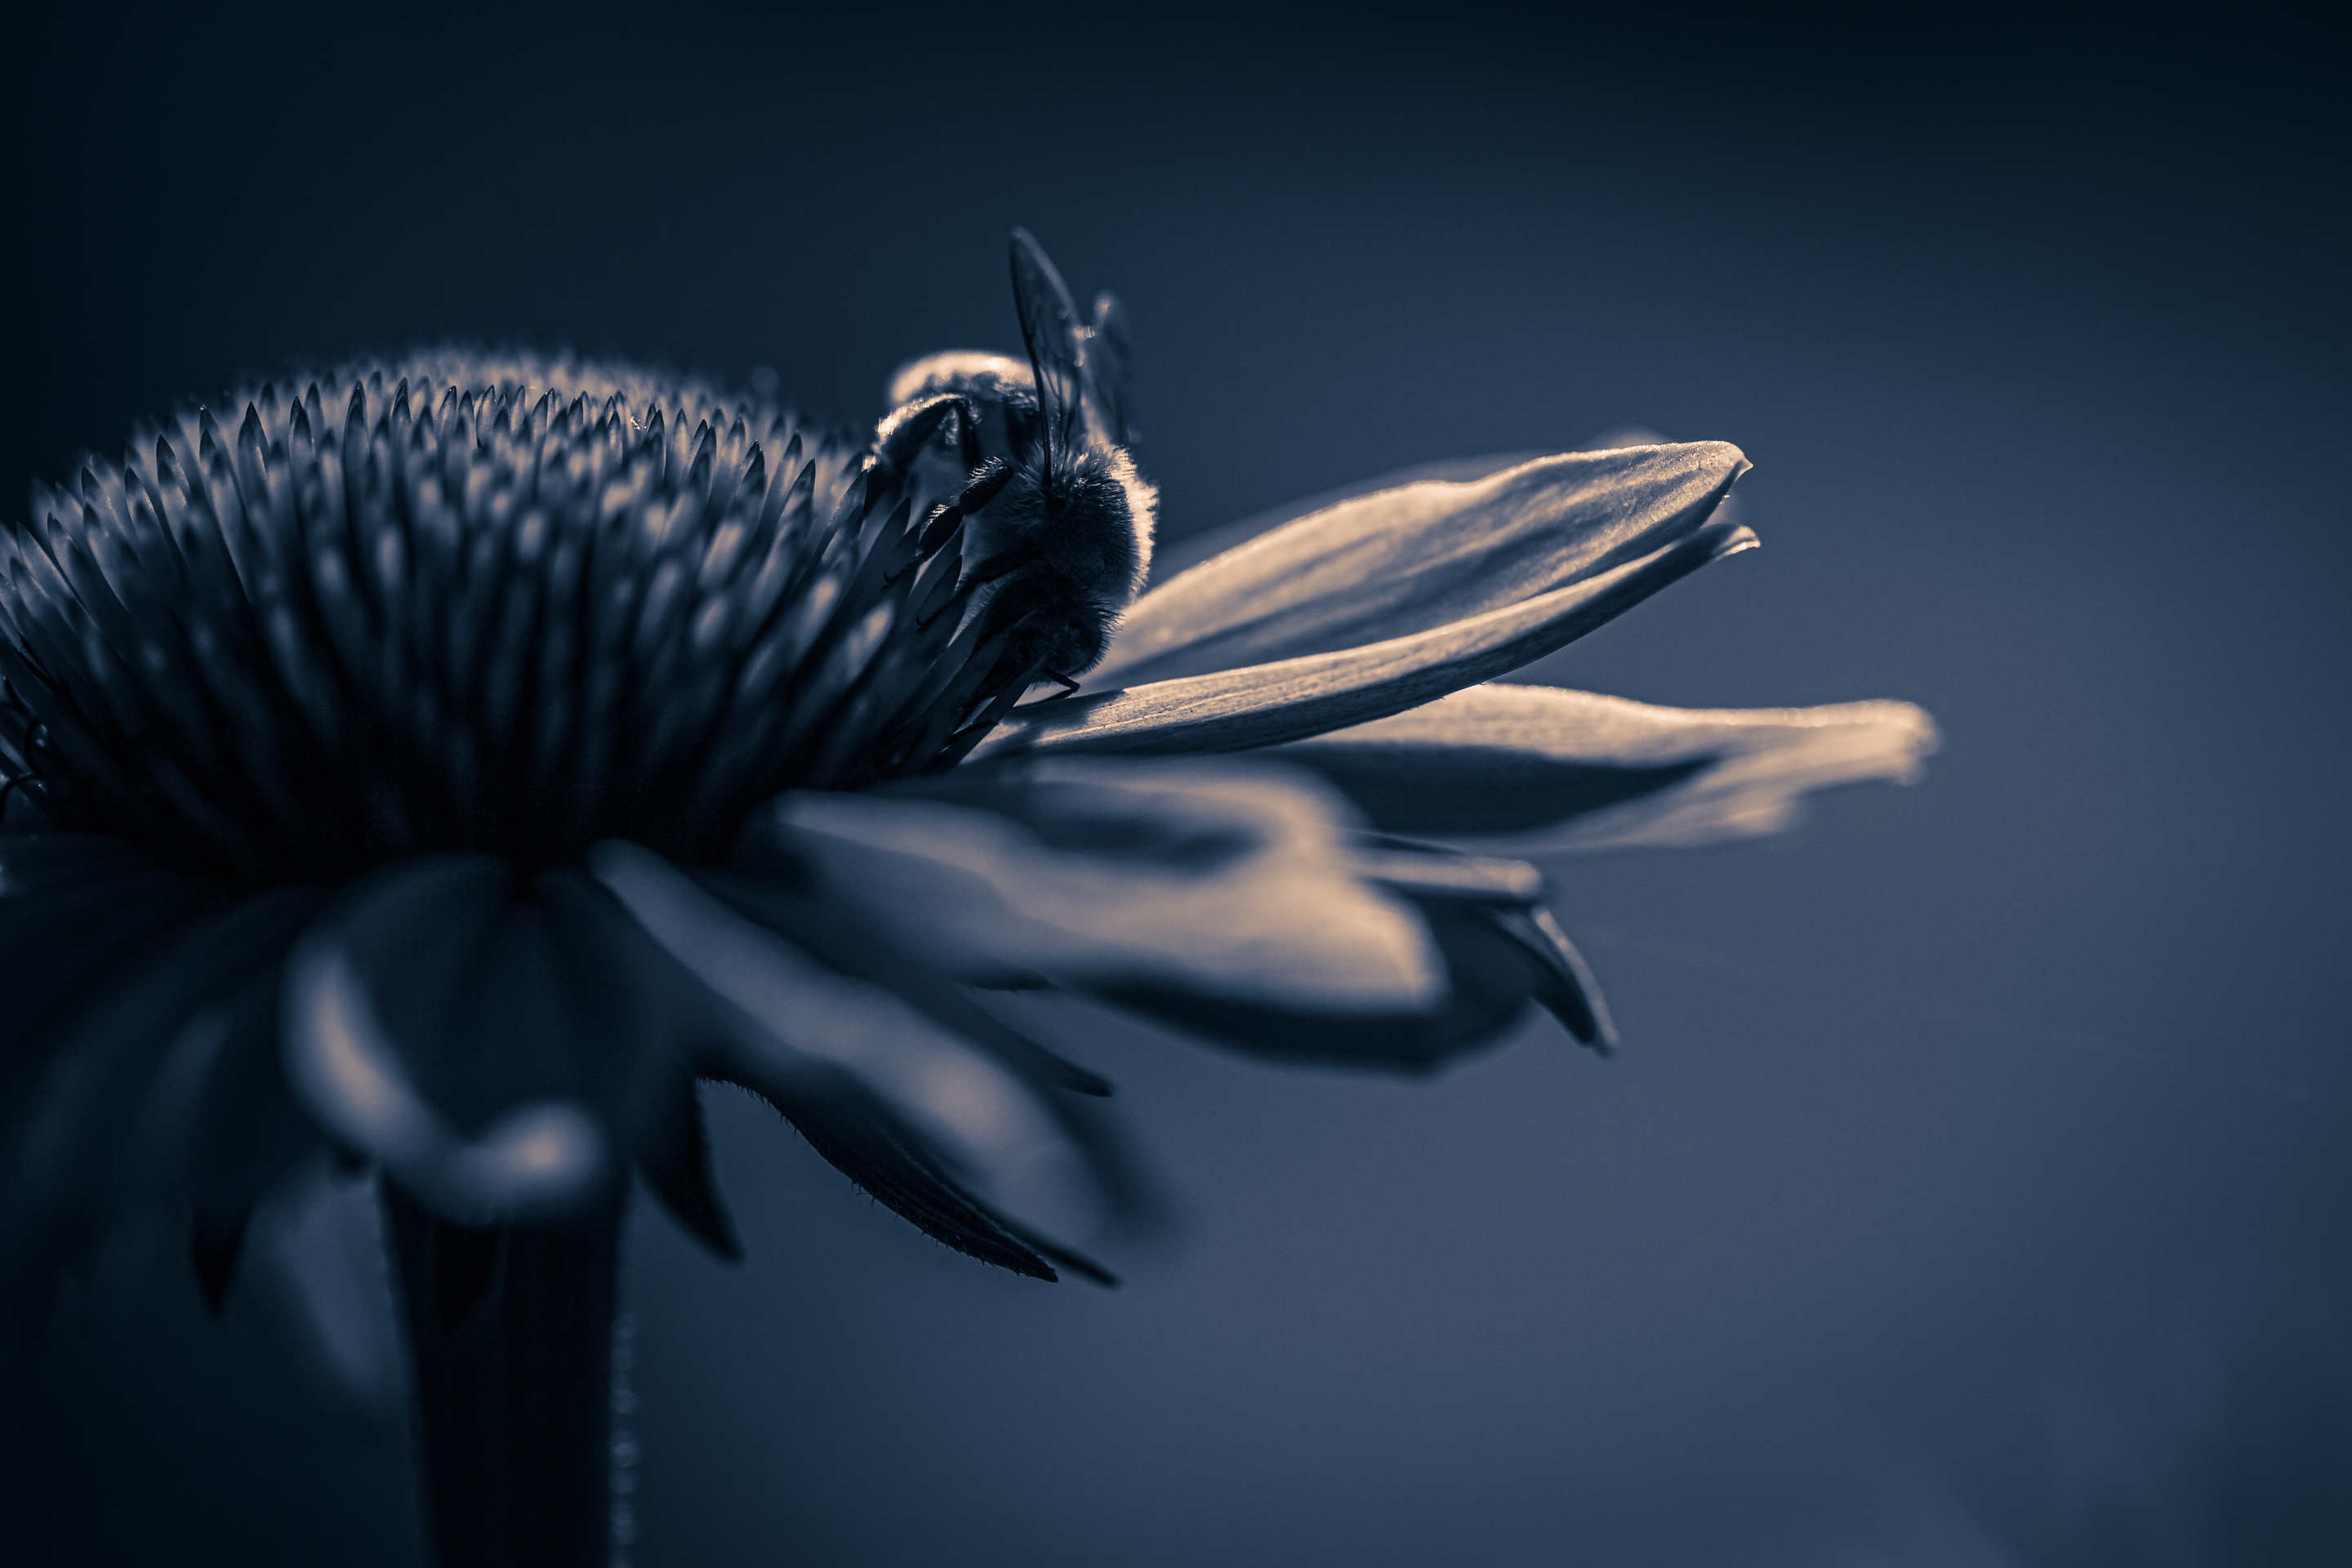 100mm low key macro photo of a single honey bee pollinating purple coneflower pistils. A strong single light source creates stark contrast of highlights and shadows. A deep blue monochrome treatment drives a dark, serious mood.